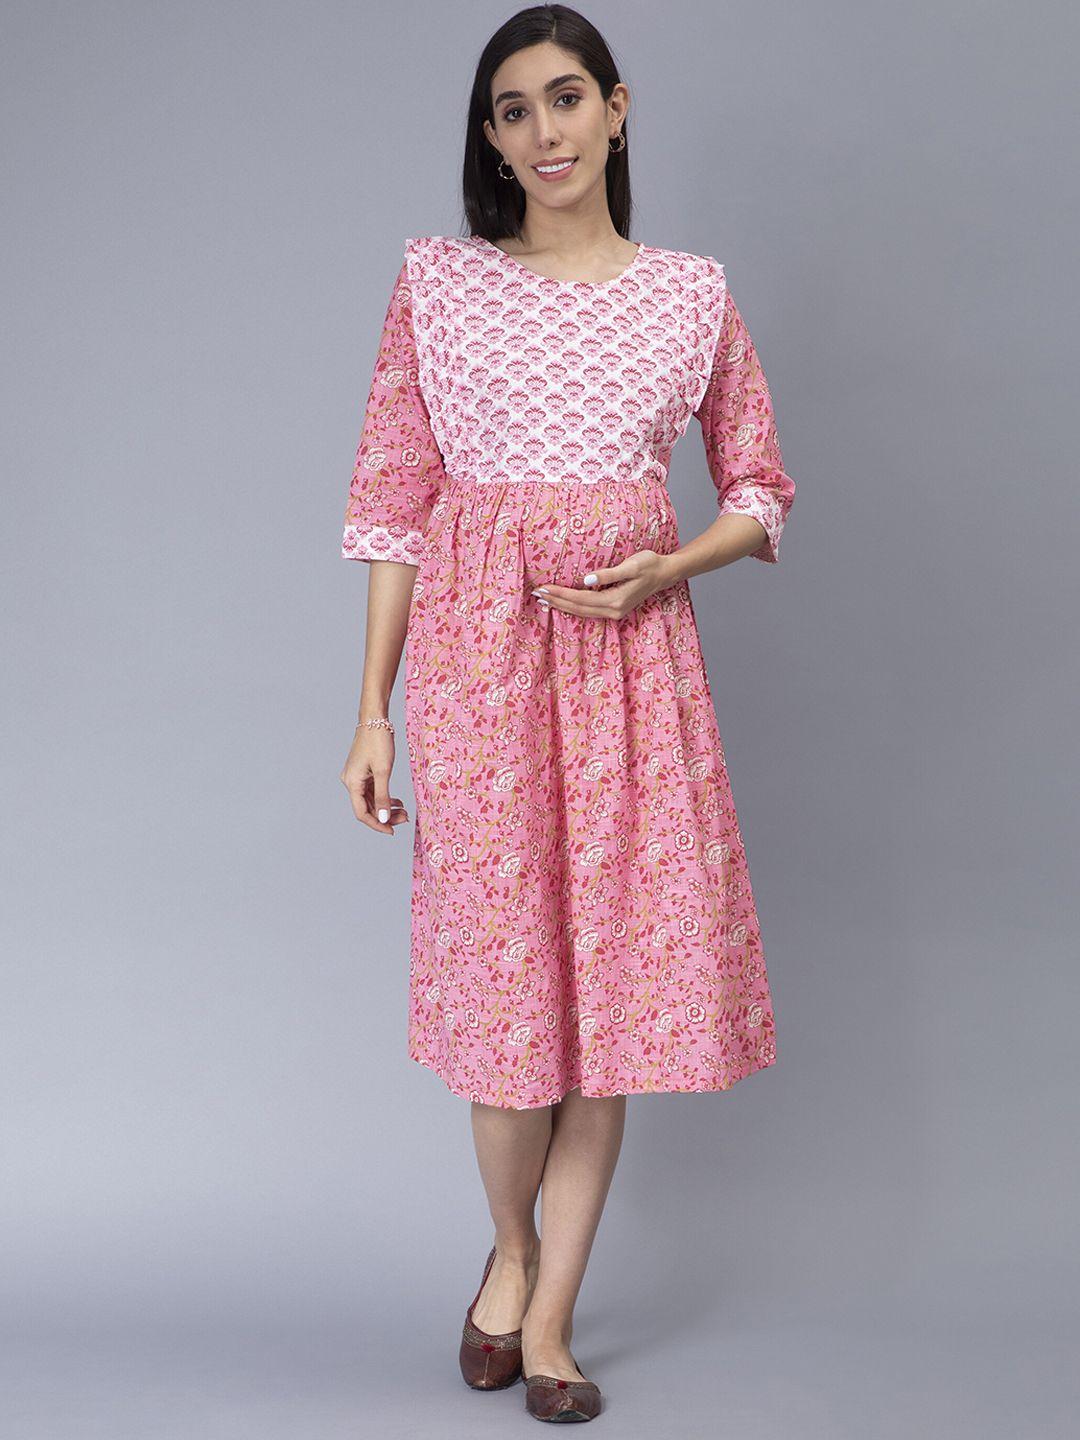 cot'n soft maternity floral printed ruffled a-line cotton dress